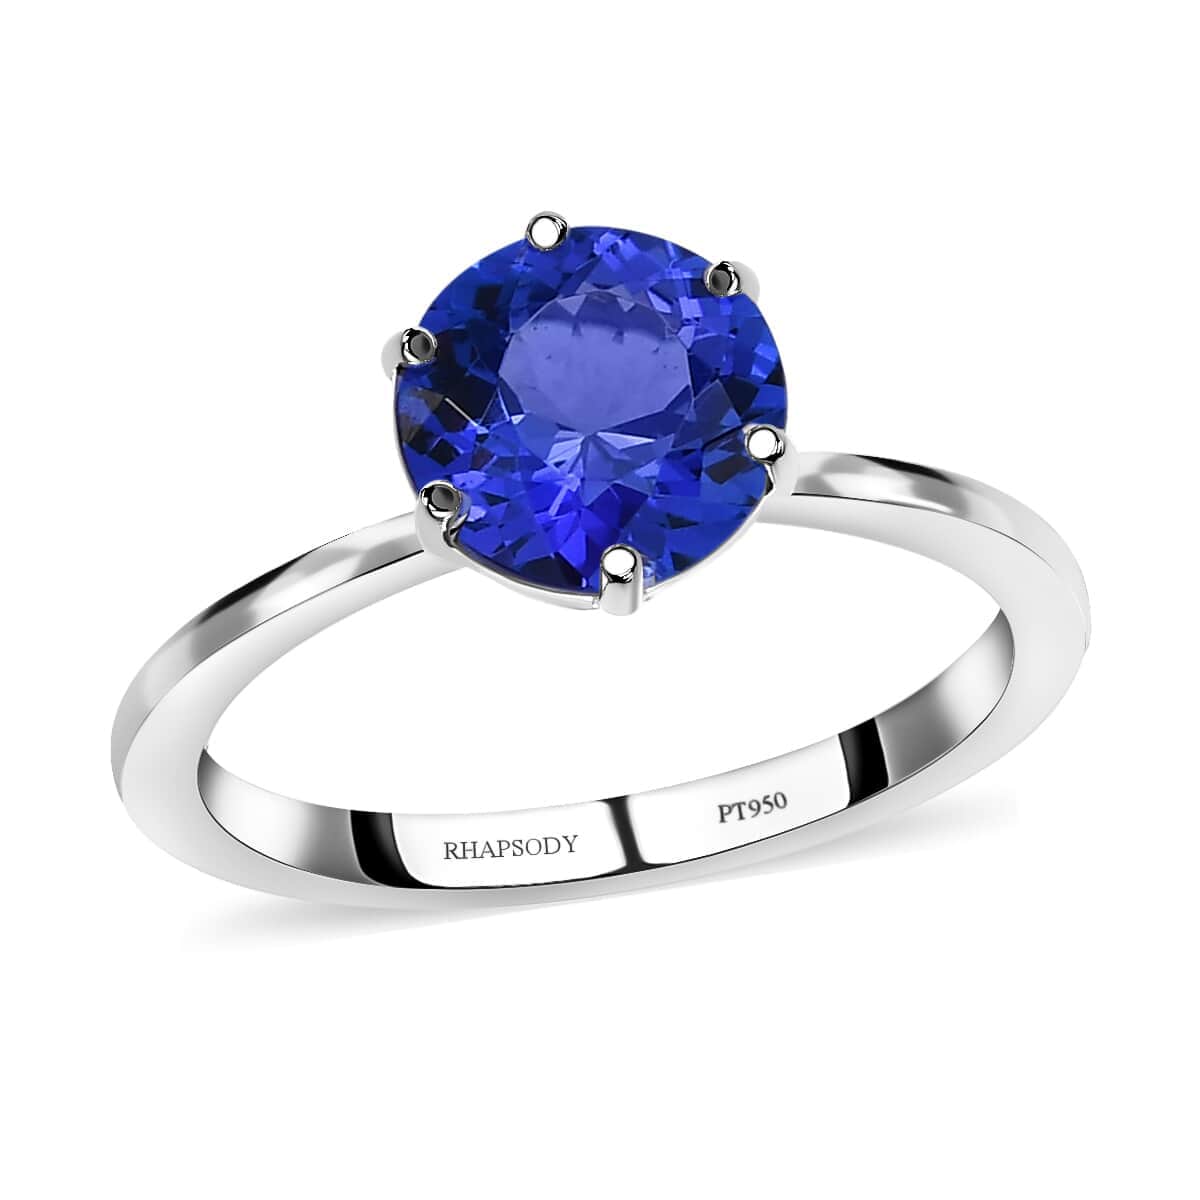 RHAPSODY 950 Platinum AAAA Portuguese Cut Tanzanite Solitaire Ring (Size 6.0) 4 Grams 2.25 ctw image number 0